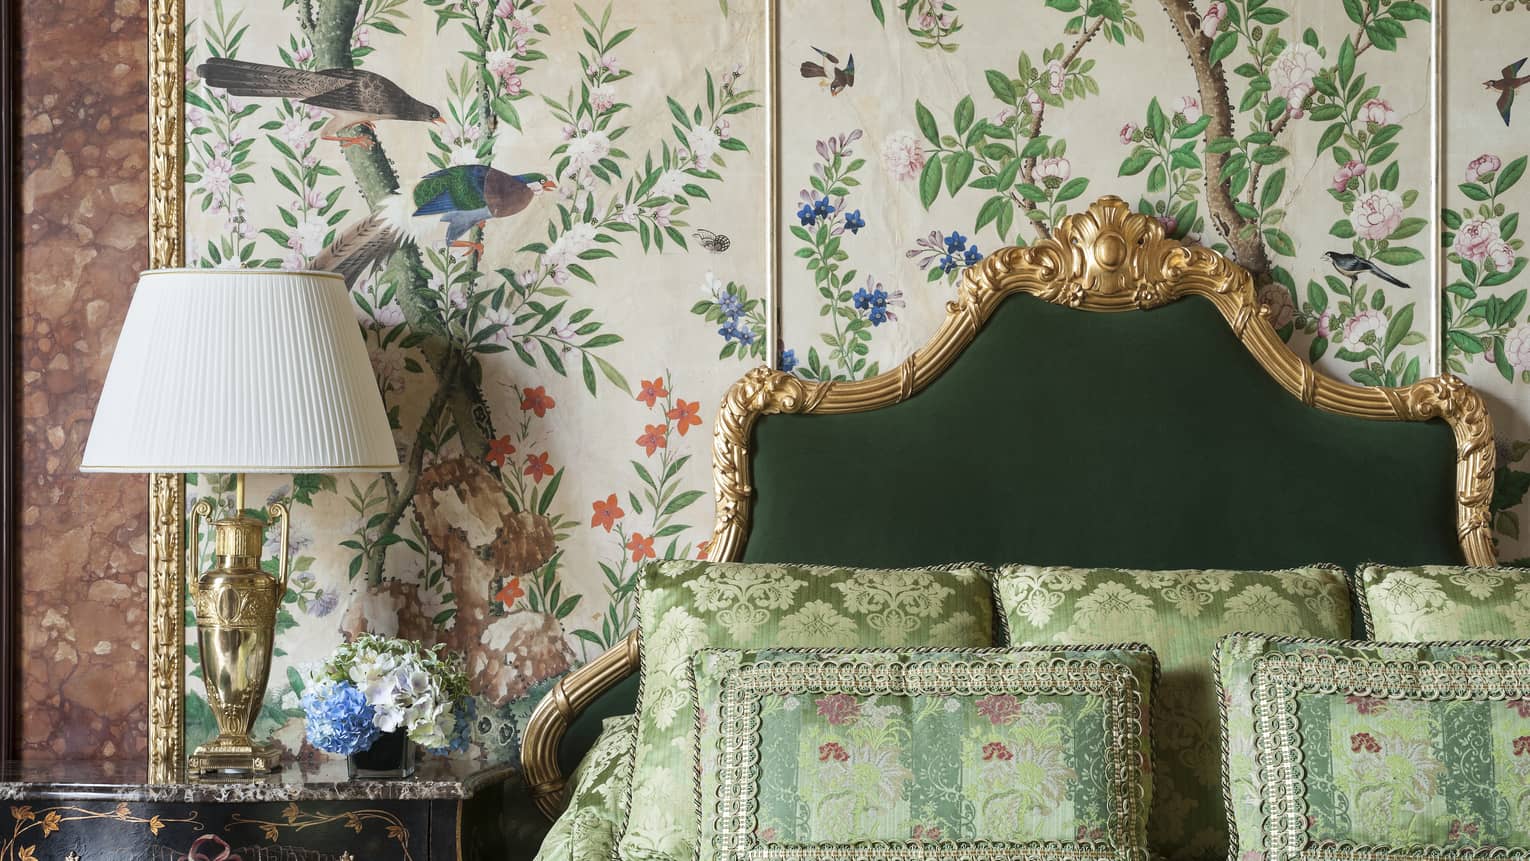 Bedroom with floral wall paper, gilded headboard and green silk bedding